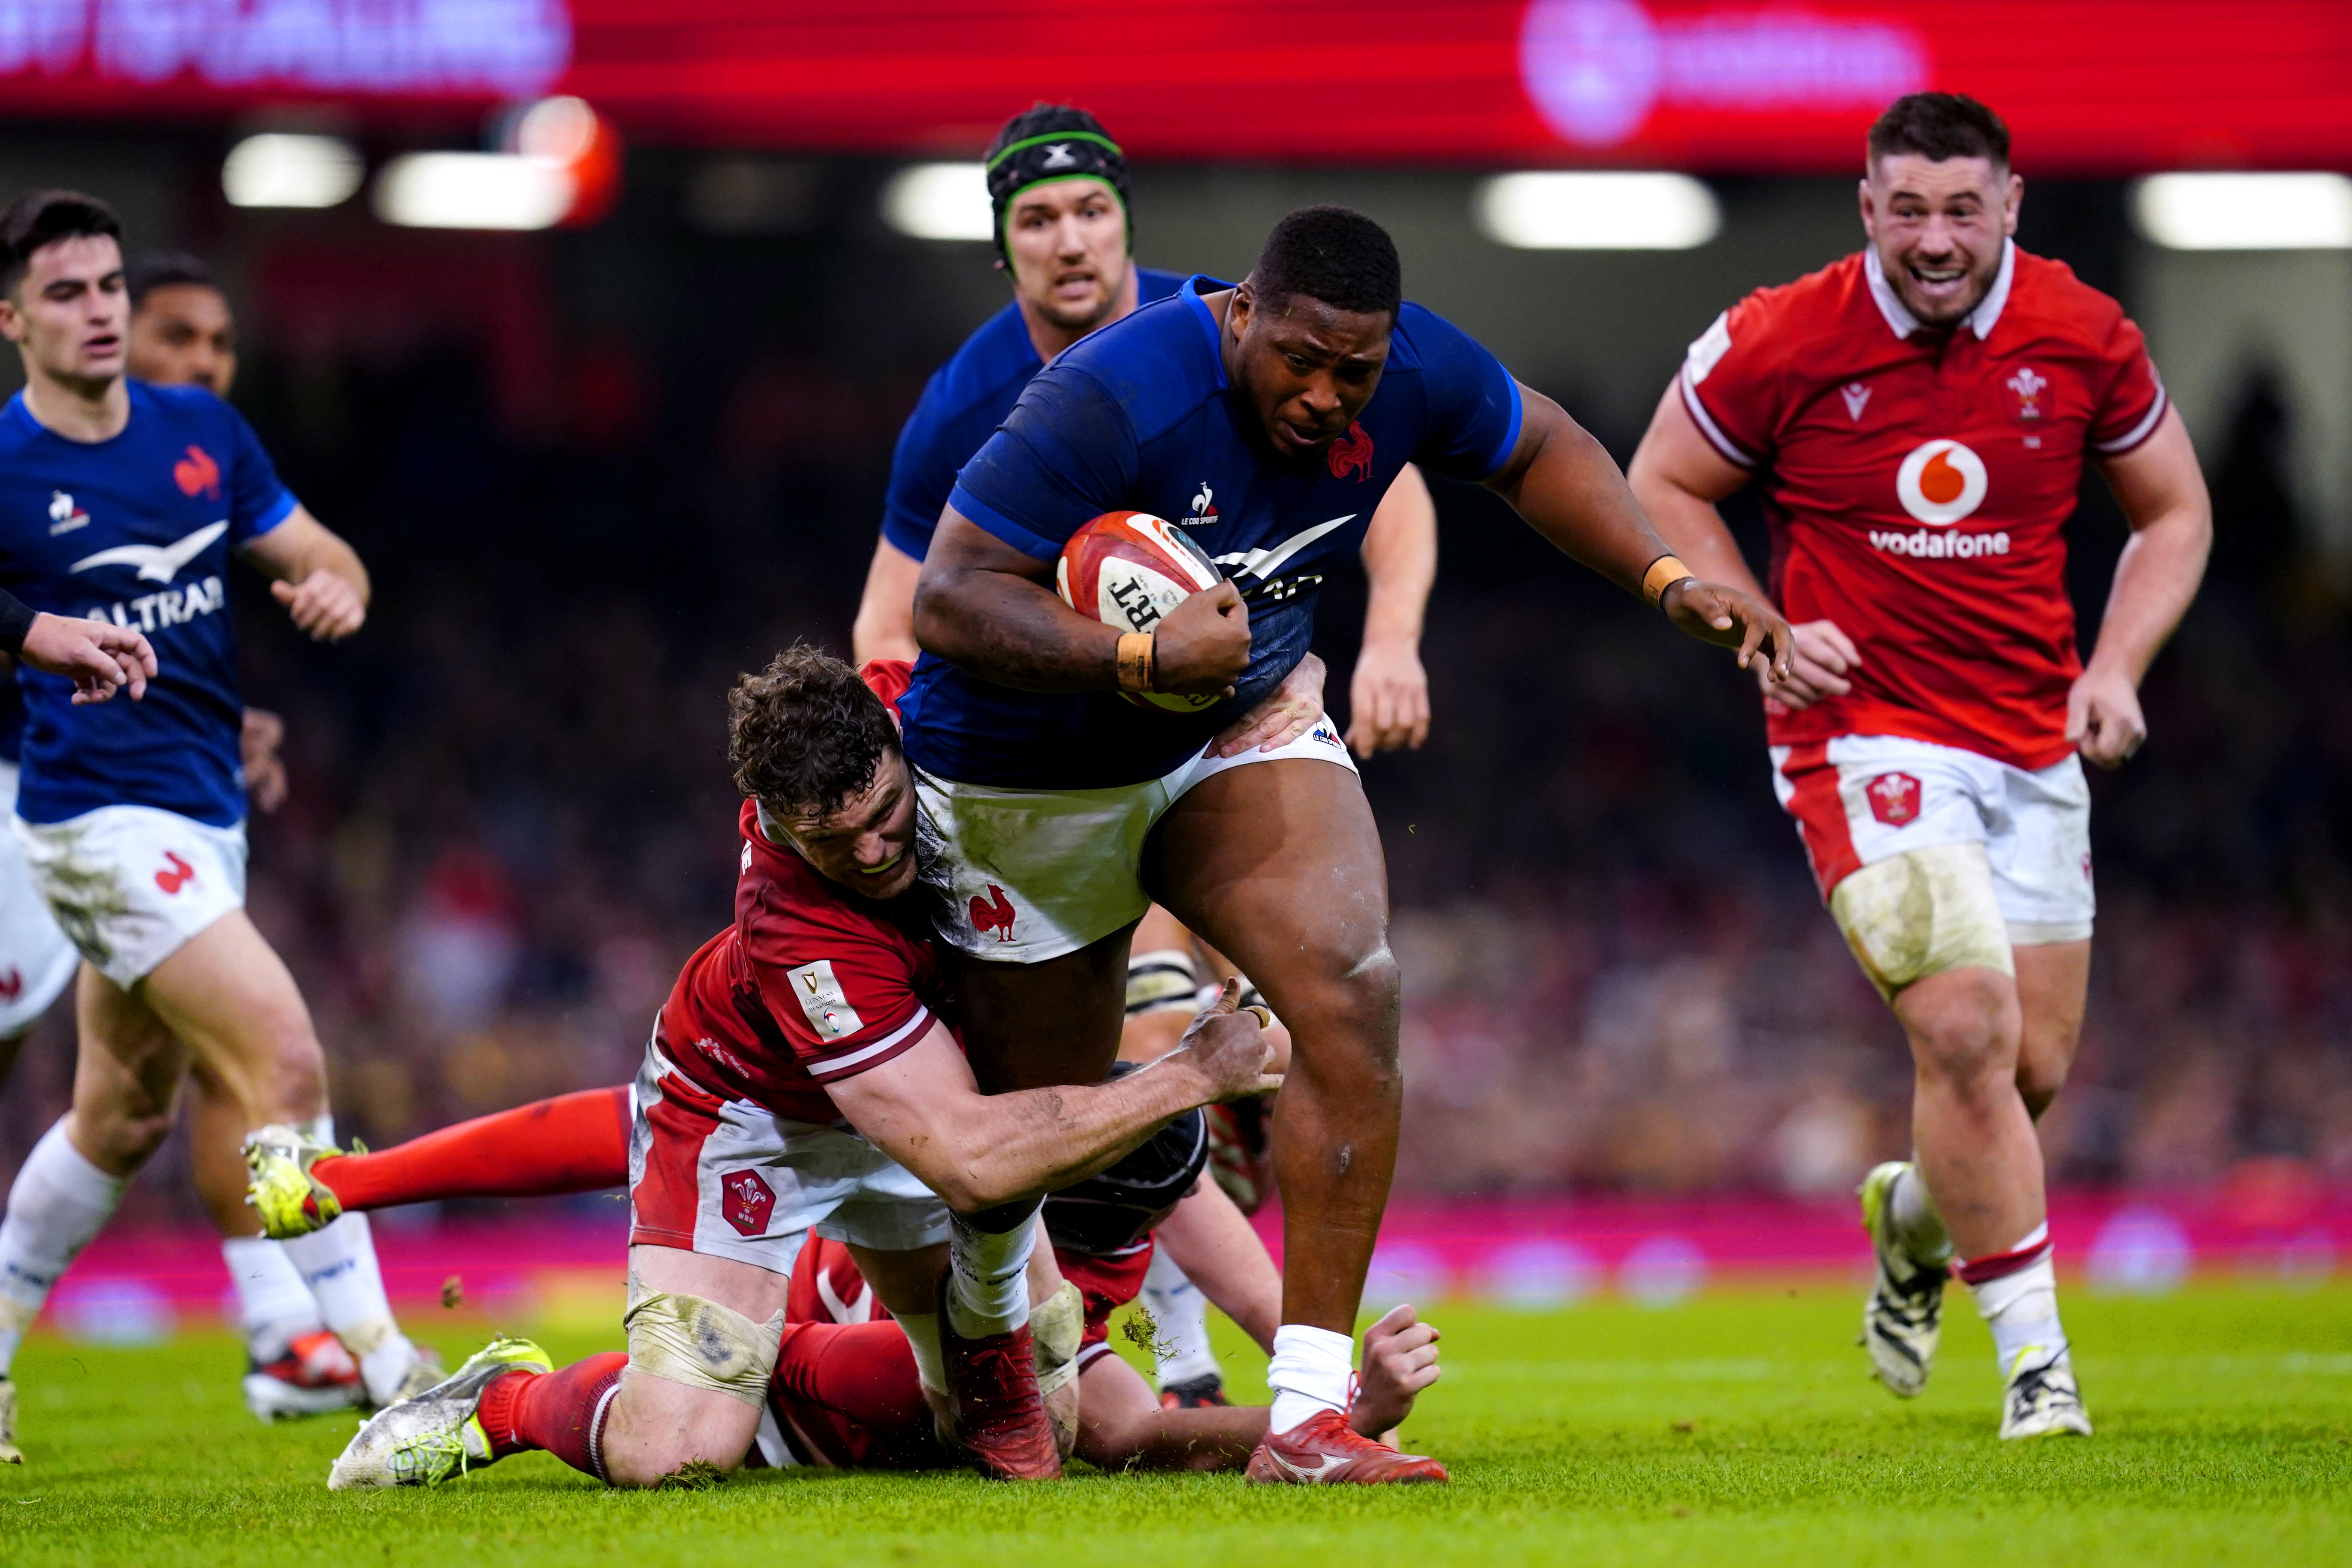 Georges-Henri Colombe impressed off the bench on debut for France